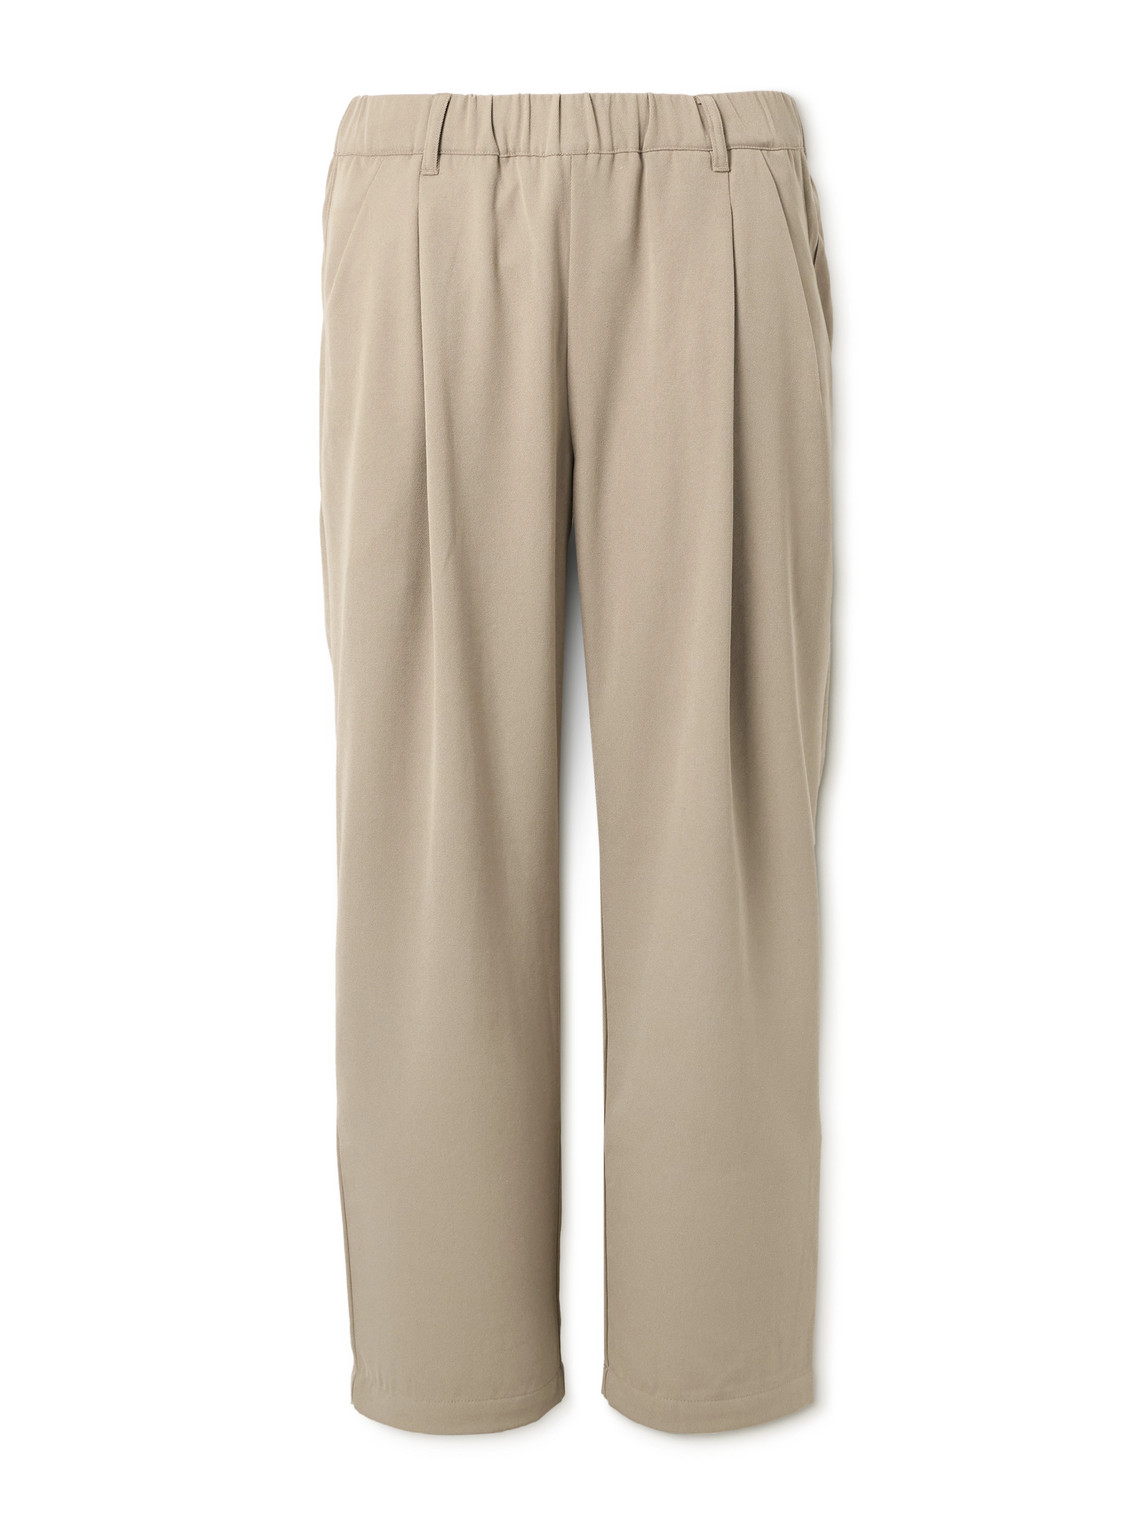 Dime Tan Pleated Trousers